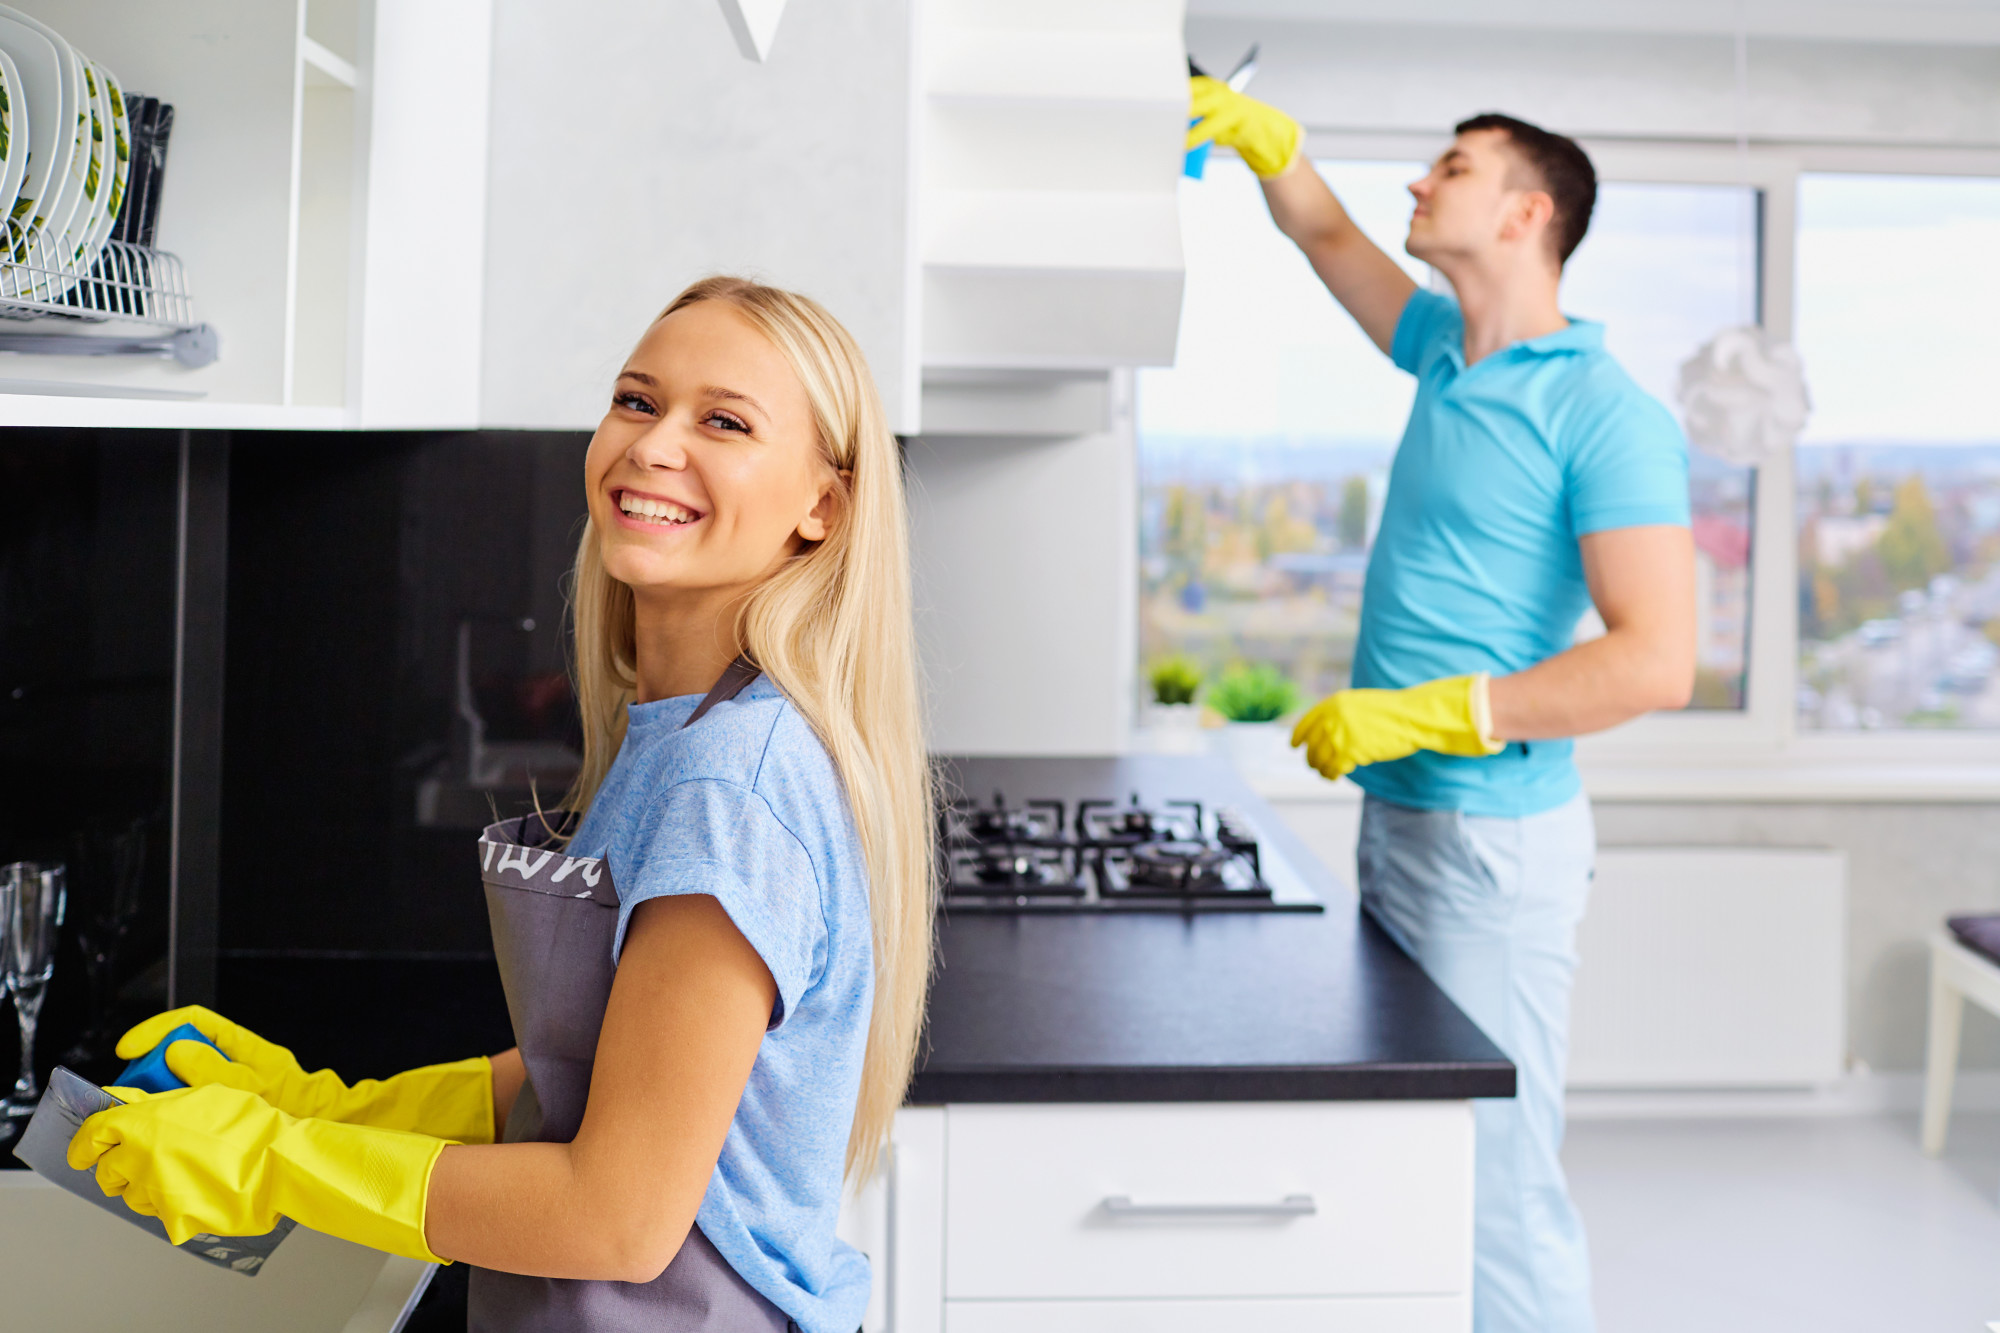 10-helpful-house-cleaning-tips-for-when-you-have-no-time-to-clean